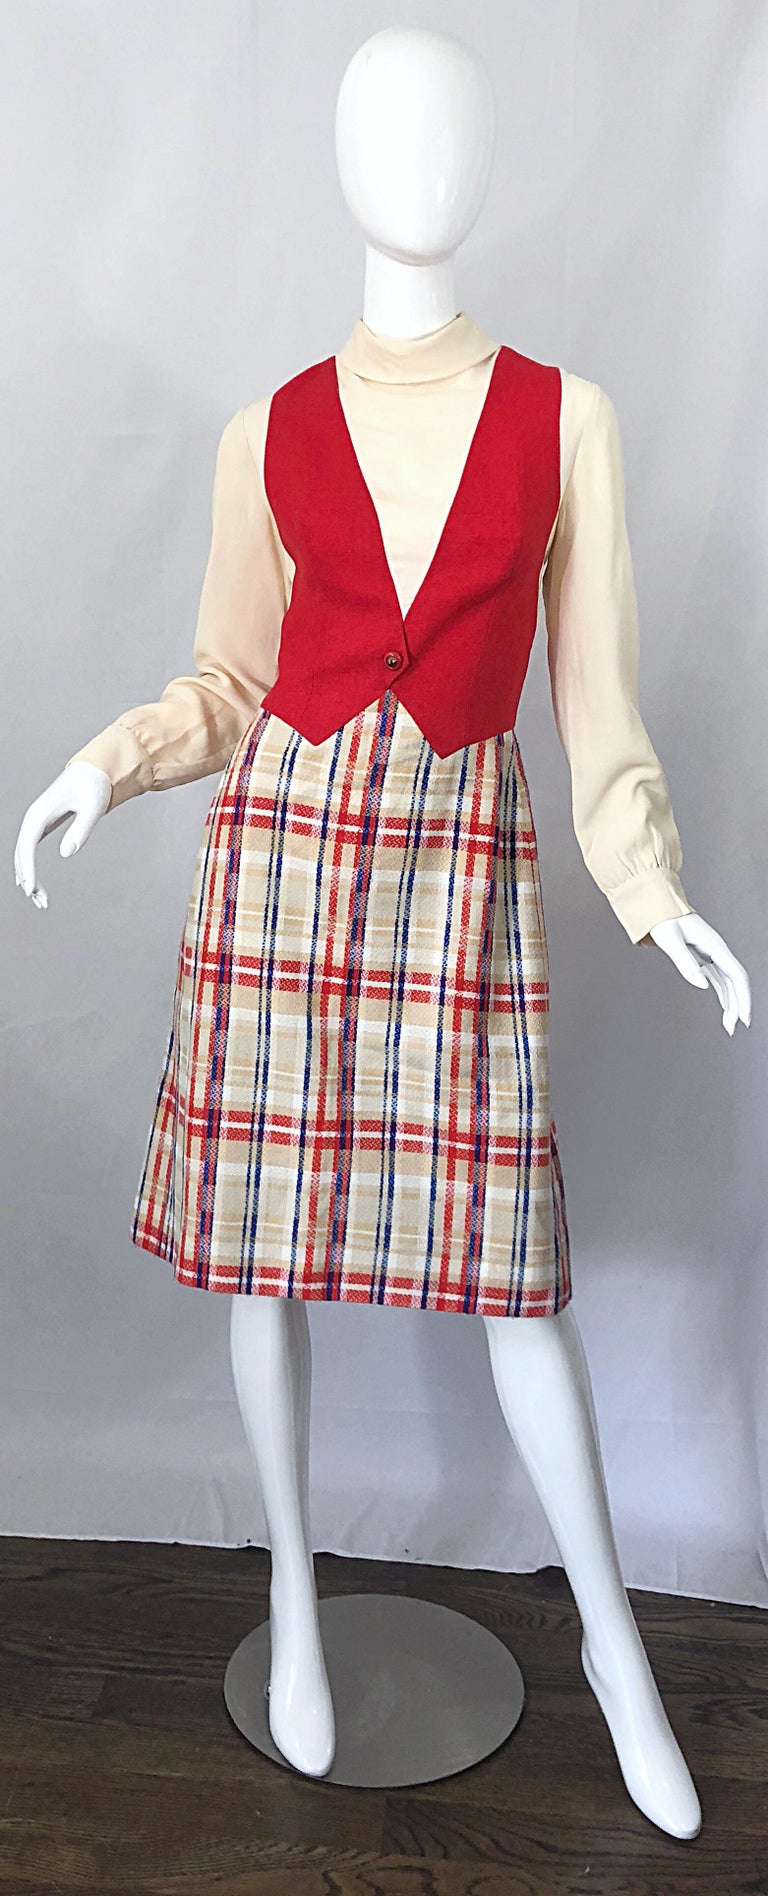 Chic mid 1960s PAT SANDLER red, white (ivory) and blue trompe l'oeil long Sleeve A-Line dress! Features a high necked ivory crepe bodice with a mock vest sewn into the dress to look like the dress is layered, when it is actually one piece. Soft wool